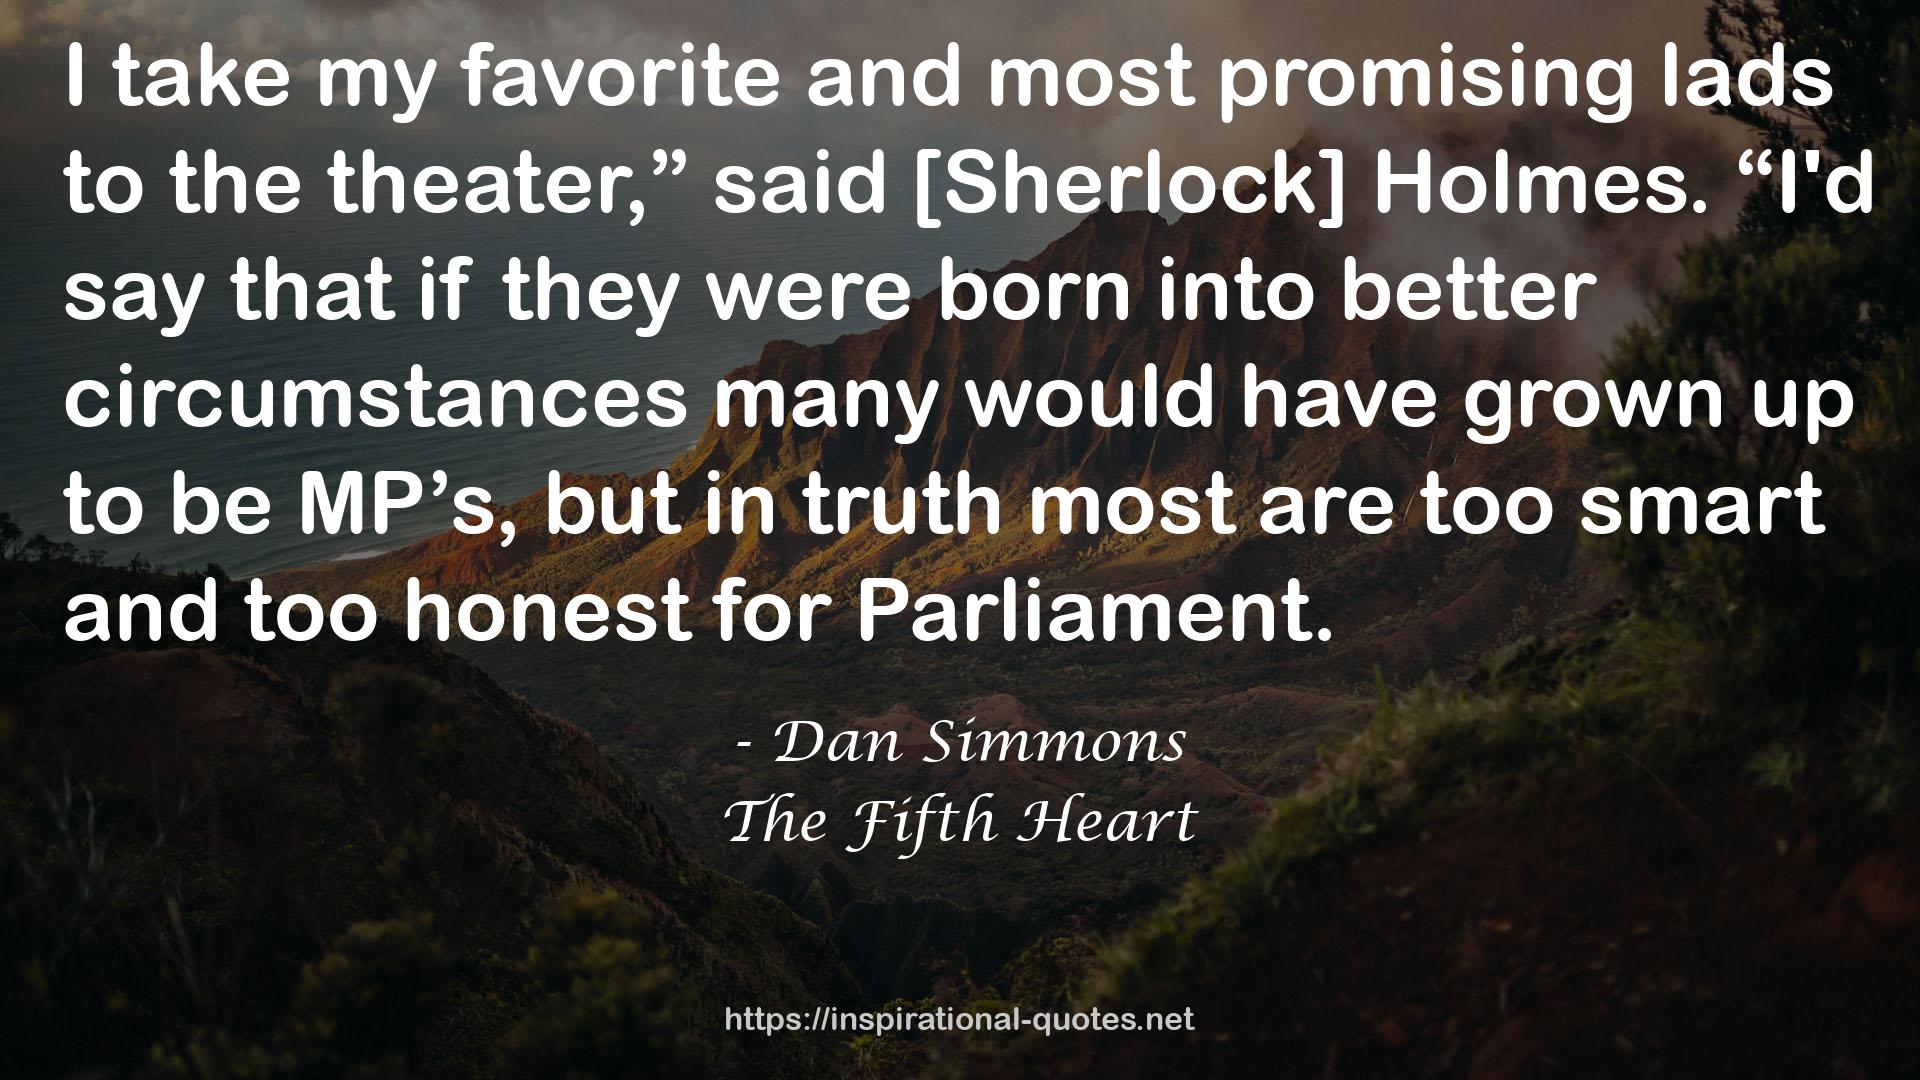 The Fifth Heart QUOTES